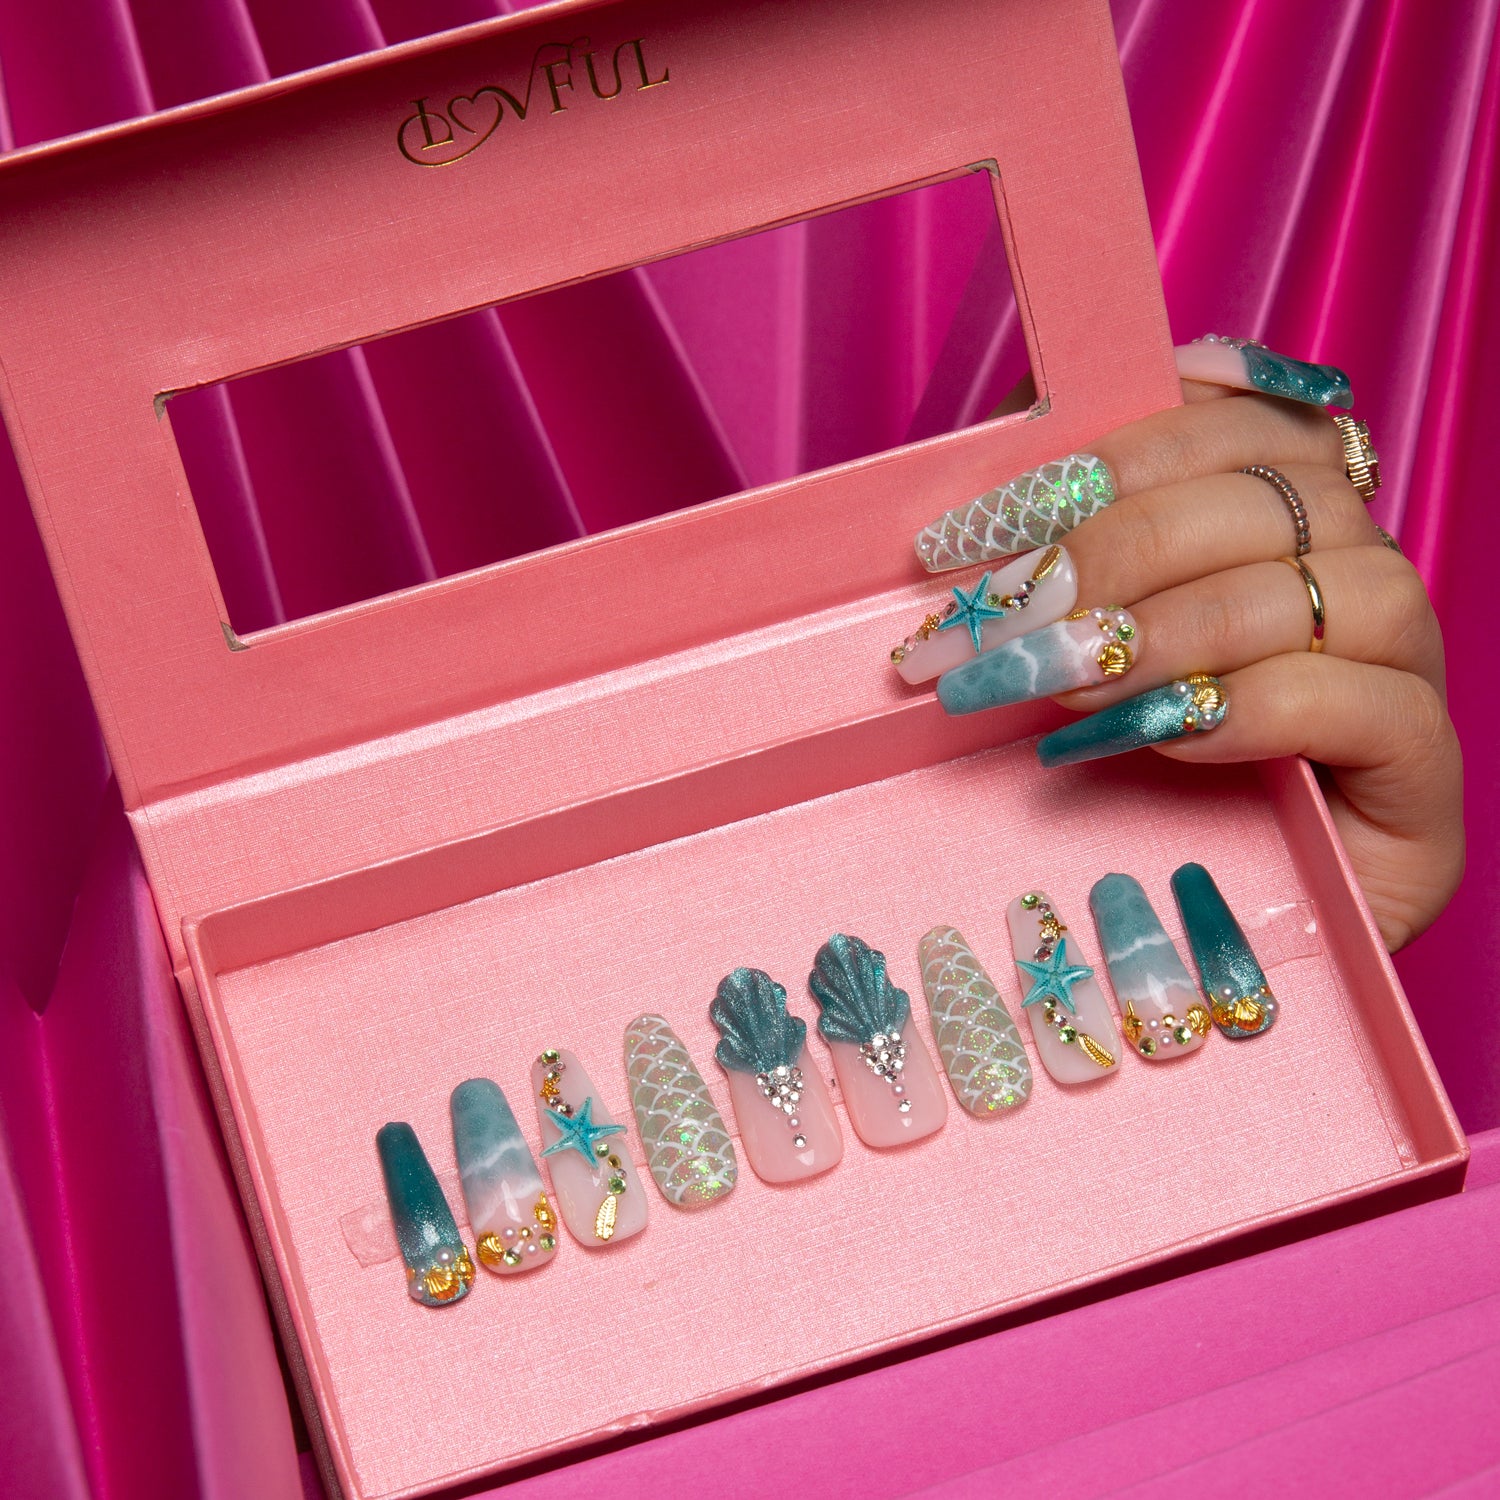 'Surfing Girls' press-on nails in a pink box, featuring a Hawaii sea blue base color with starfish, shells, and glitters, giving a joyful beach vibe.